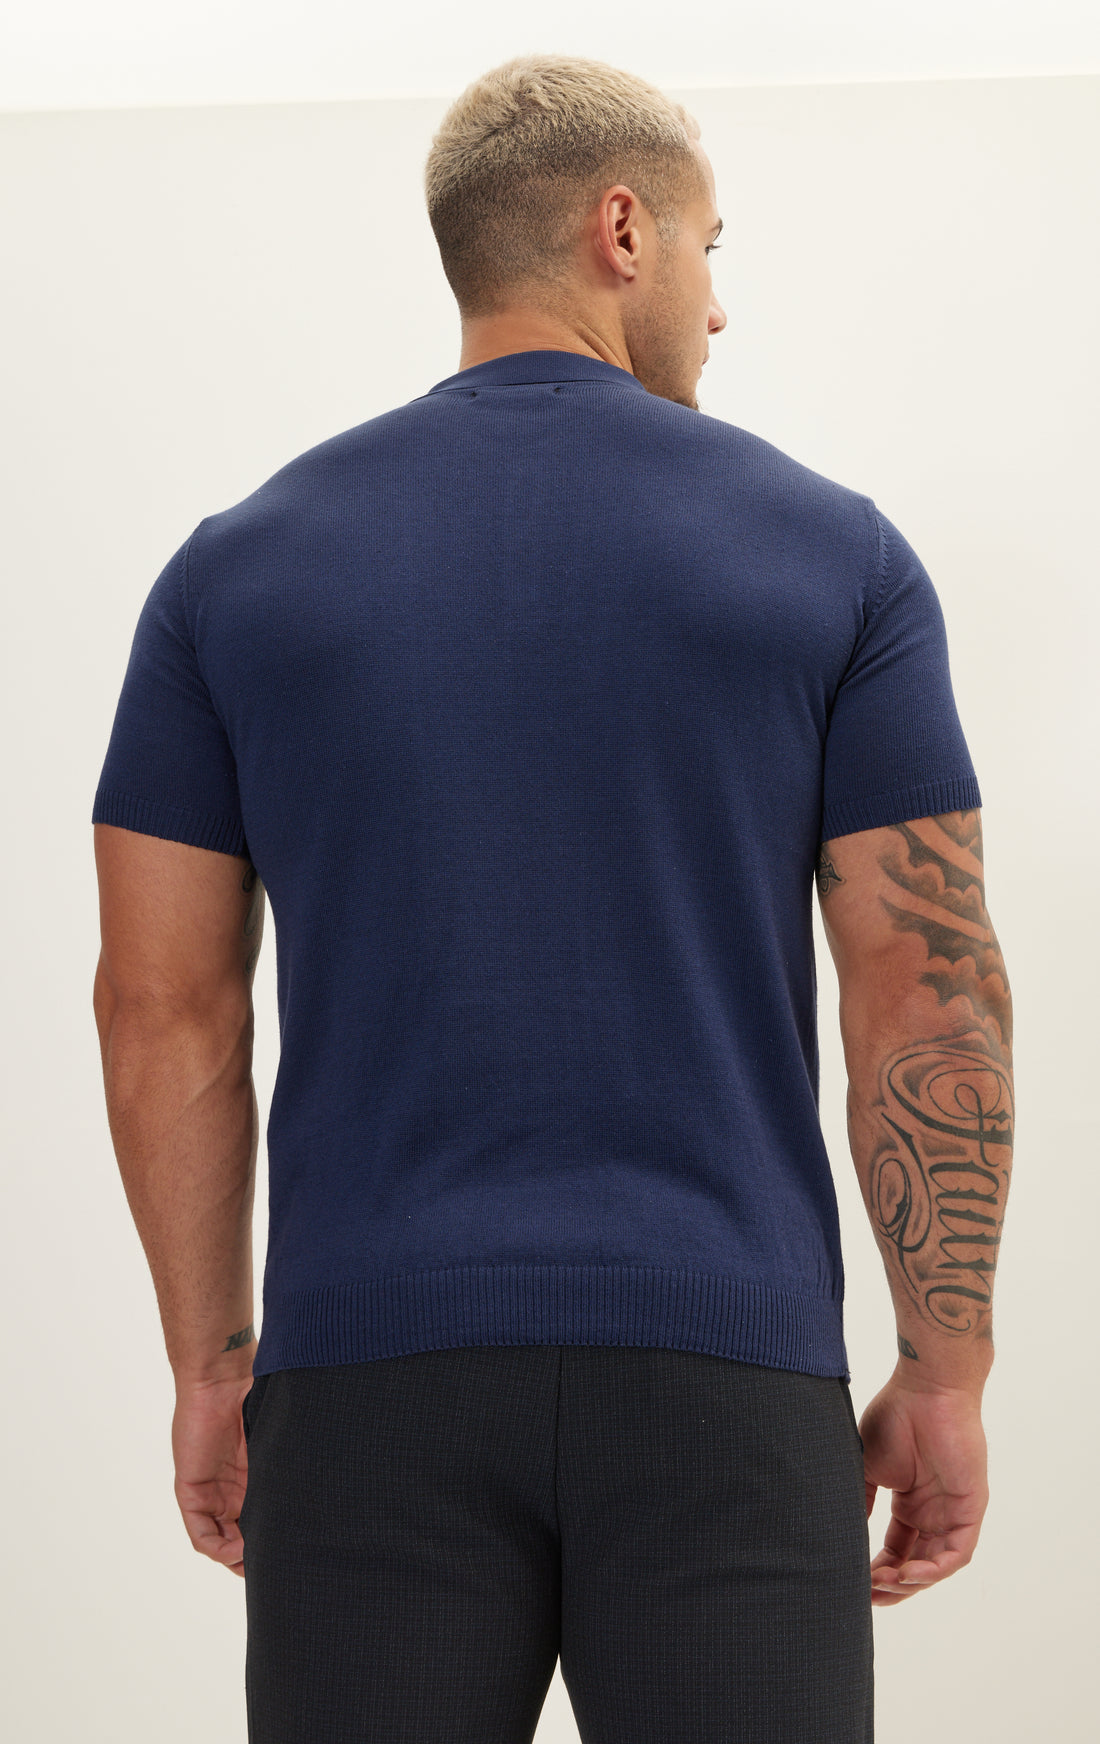 N° 6179 KNITTED POLO SHIRT - NAVY